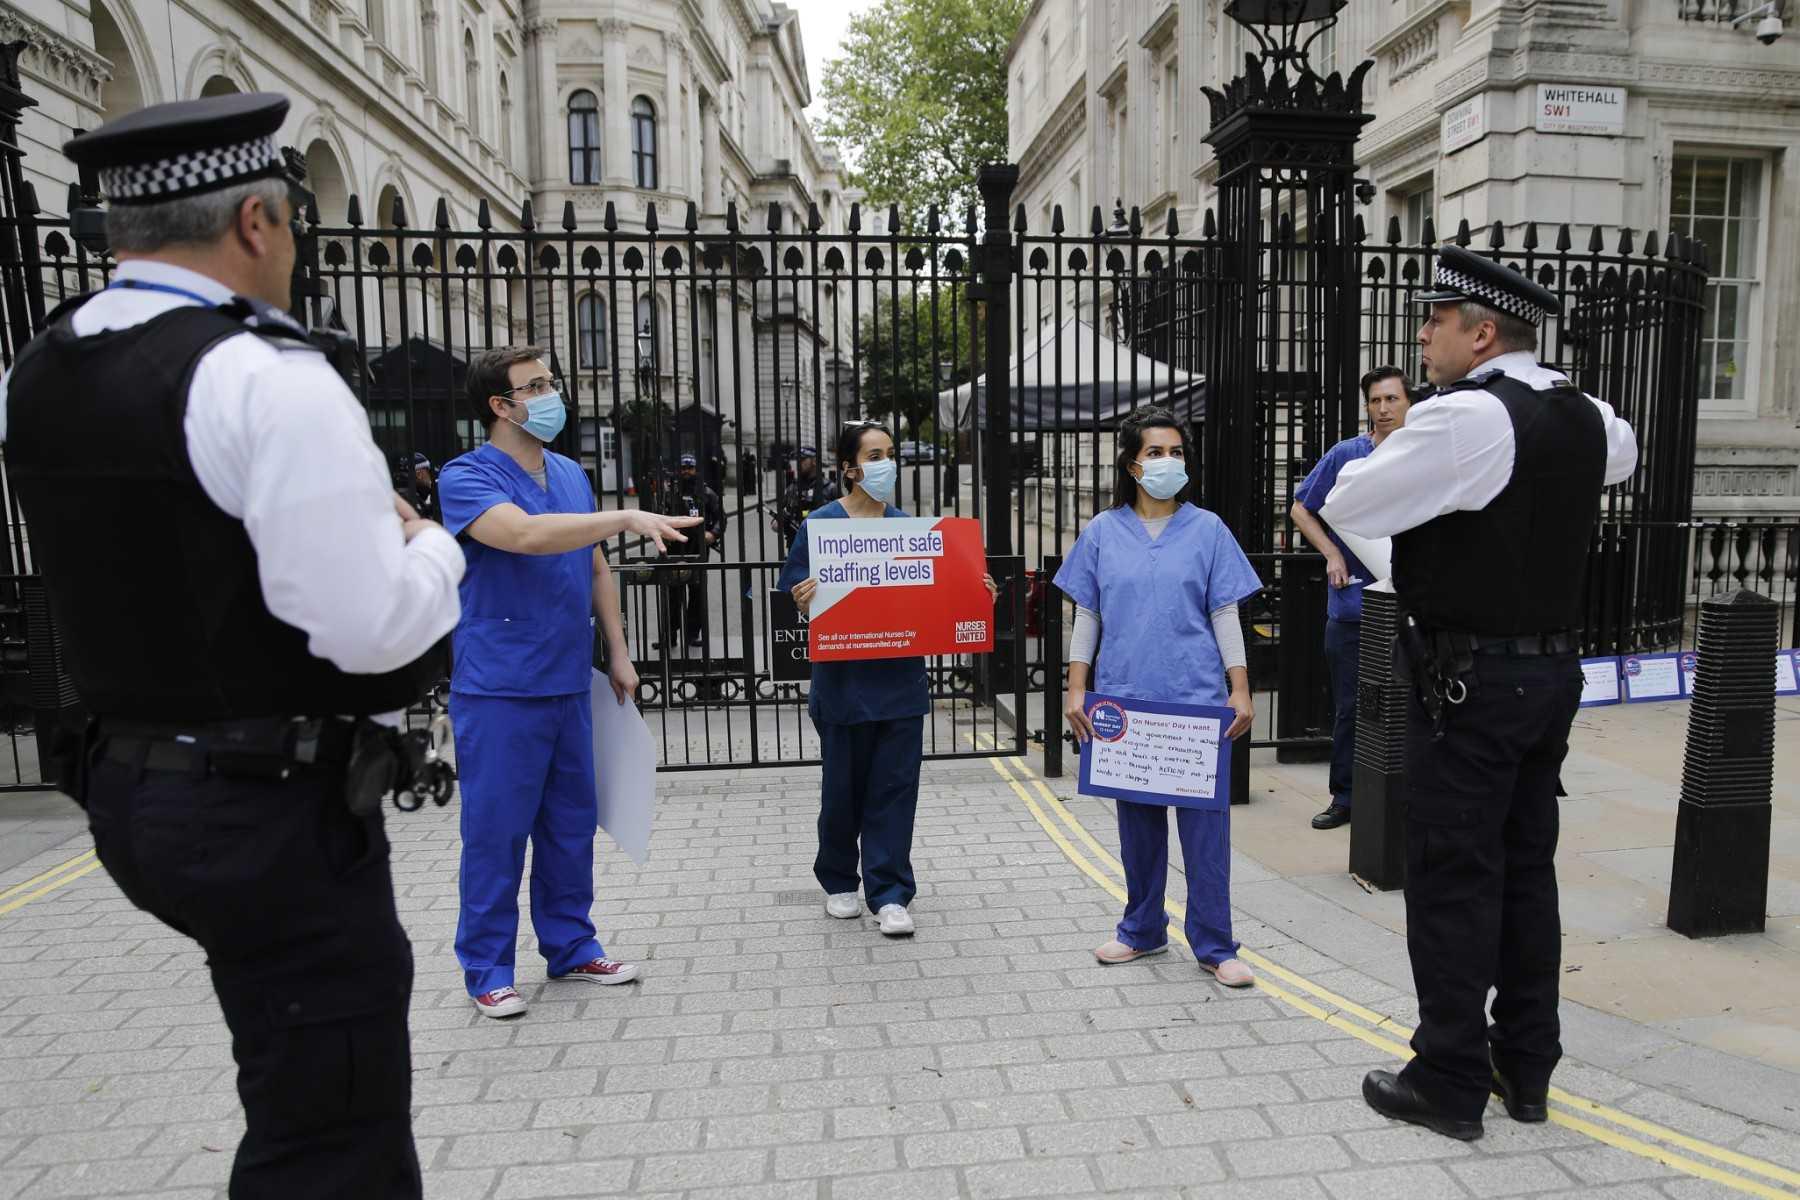 Nurses protest with placards outside Downing Street in central London on May 13, 2020. Photo: AFP